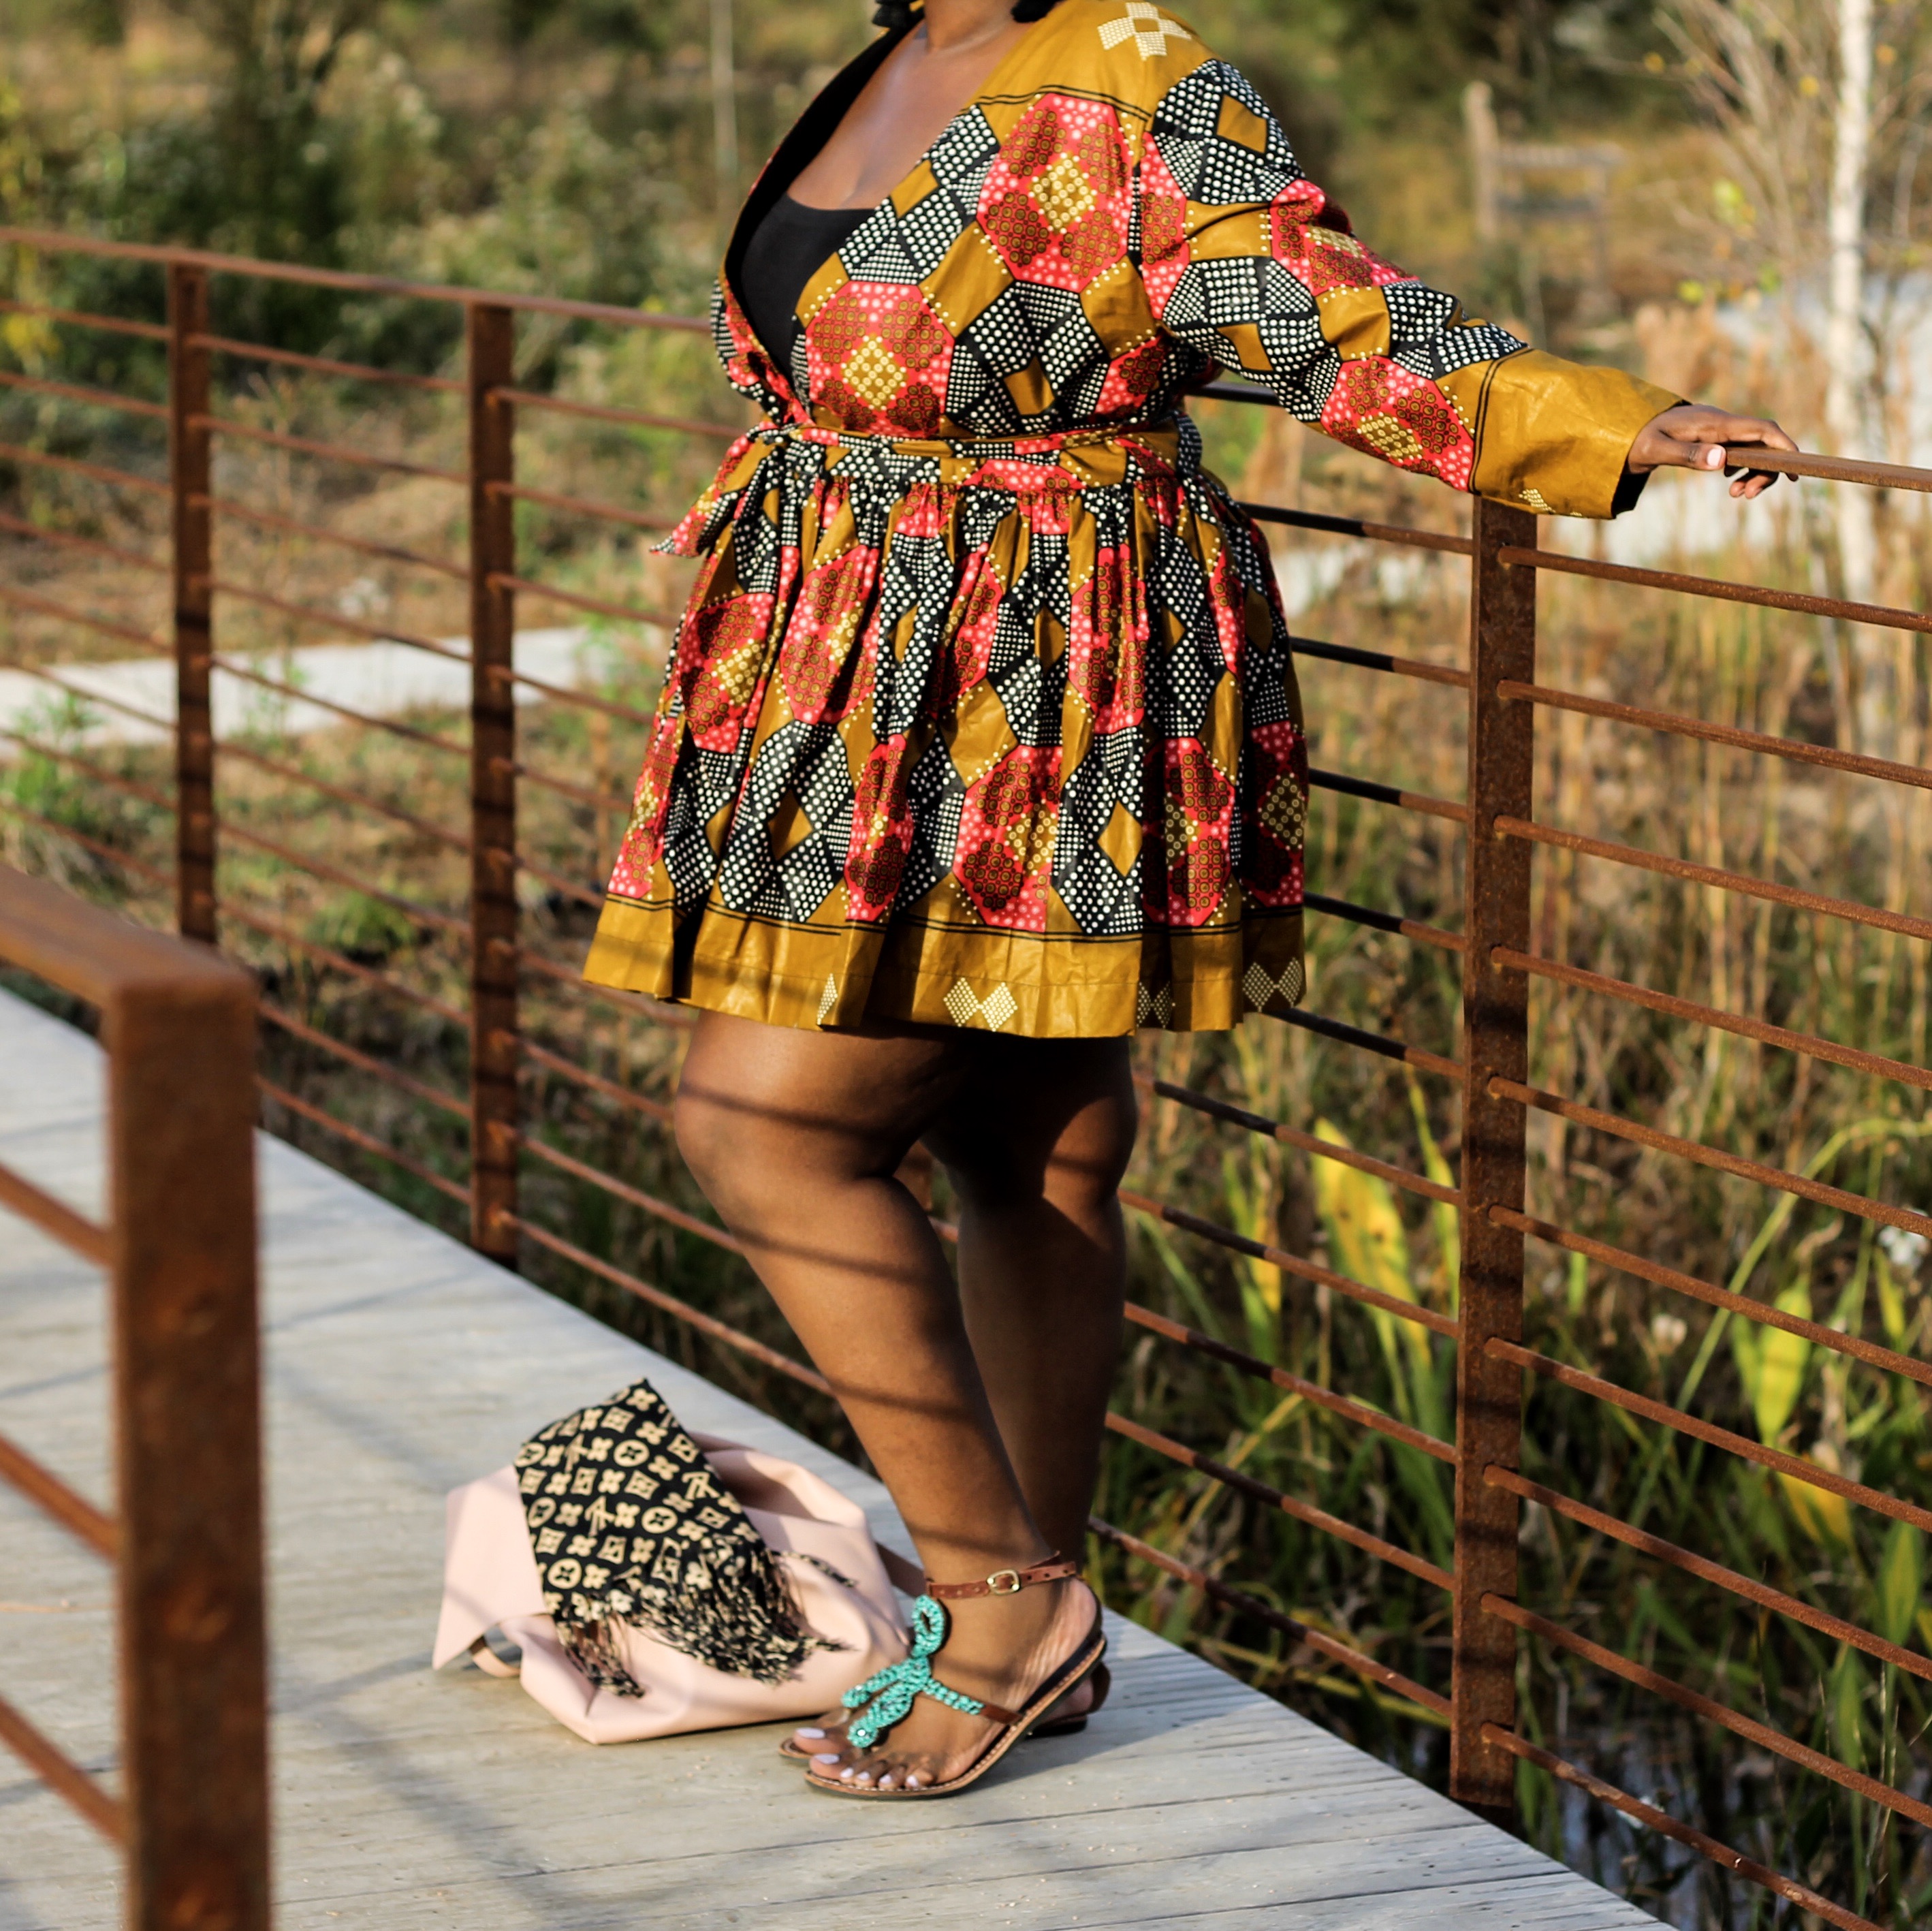 preppy plus size fashion blogs 2017, beautiful curvy girls, how to fill the eye brow of a dark skin, beautiful plus size dark skin girls, plus size black bloggers, clothes for curvy girls, curvy girl fashion clothing, plus blog, plus size fashion tips, plus size women blog, curvy women fashion, plus blog, curvy girl fashion blog, style plus curves, plus size fashion instagram, curvy girl blog, bbw blog, plus size street fashion, plus size beauty blog, plus size fashion ideas, curvy girl summer outfits, plus size fashion magazine, plus fashion bloggers, zara, Rosie the riveter shirt; Emilia embroidered beaded clutch; Vince Camuto heels; Lula shell drop earrings; Aldo Galigossi sunnies, tenge collection, ankara